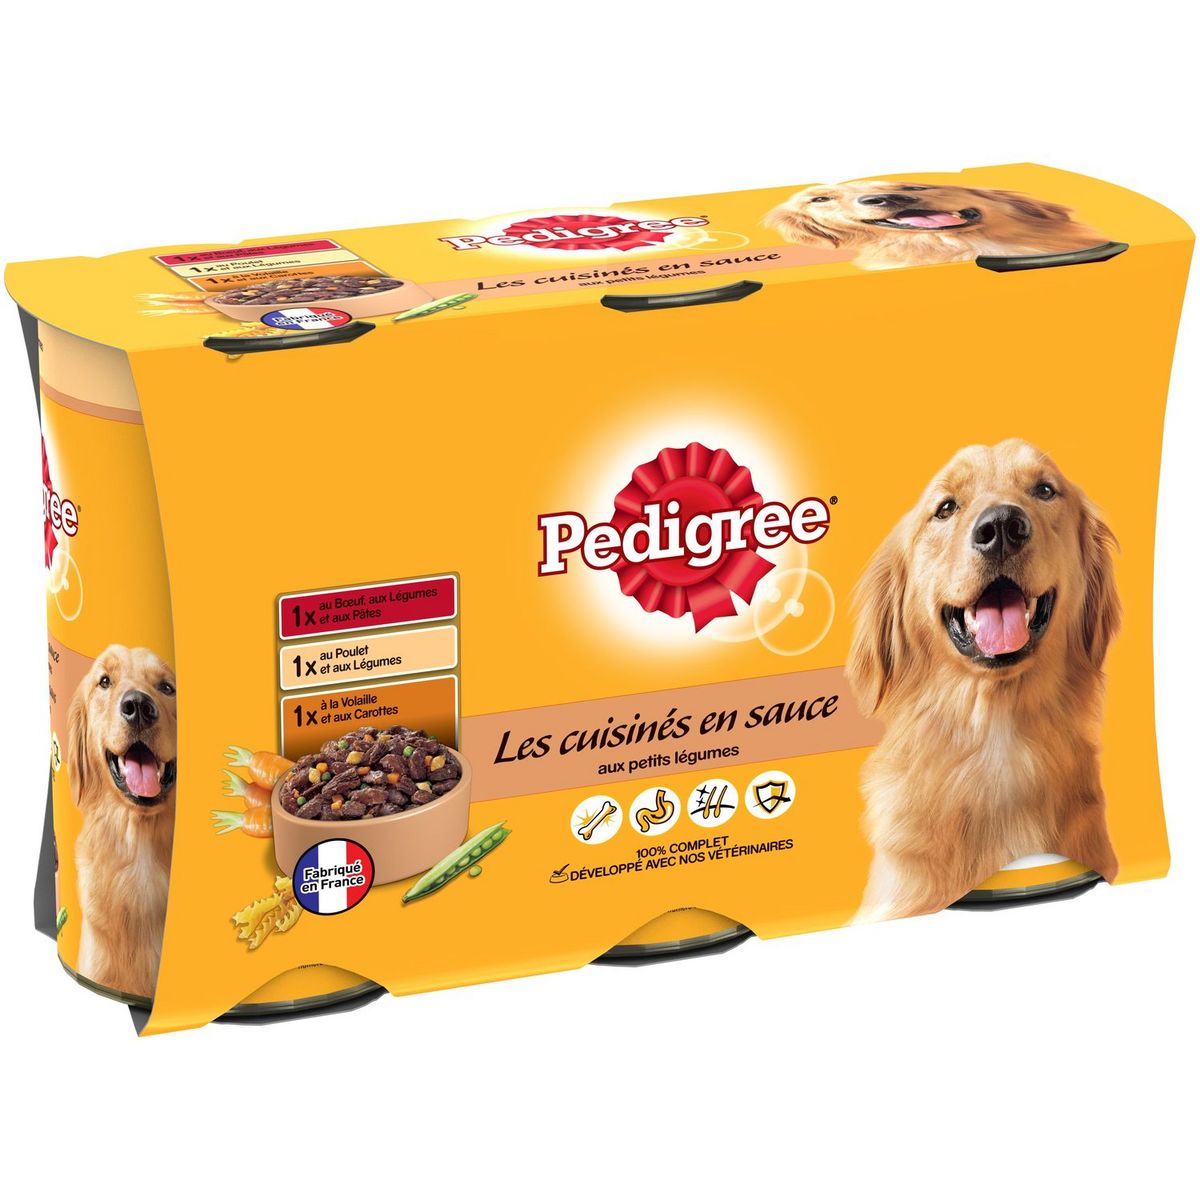 PEDIGREE Tins of local simmers in sauce 3 varieties for dogs 3x1.2kg